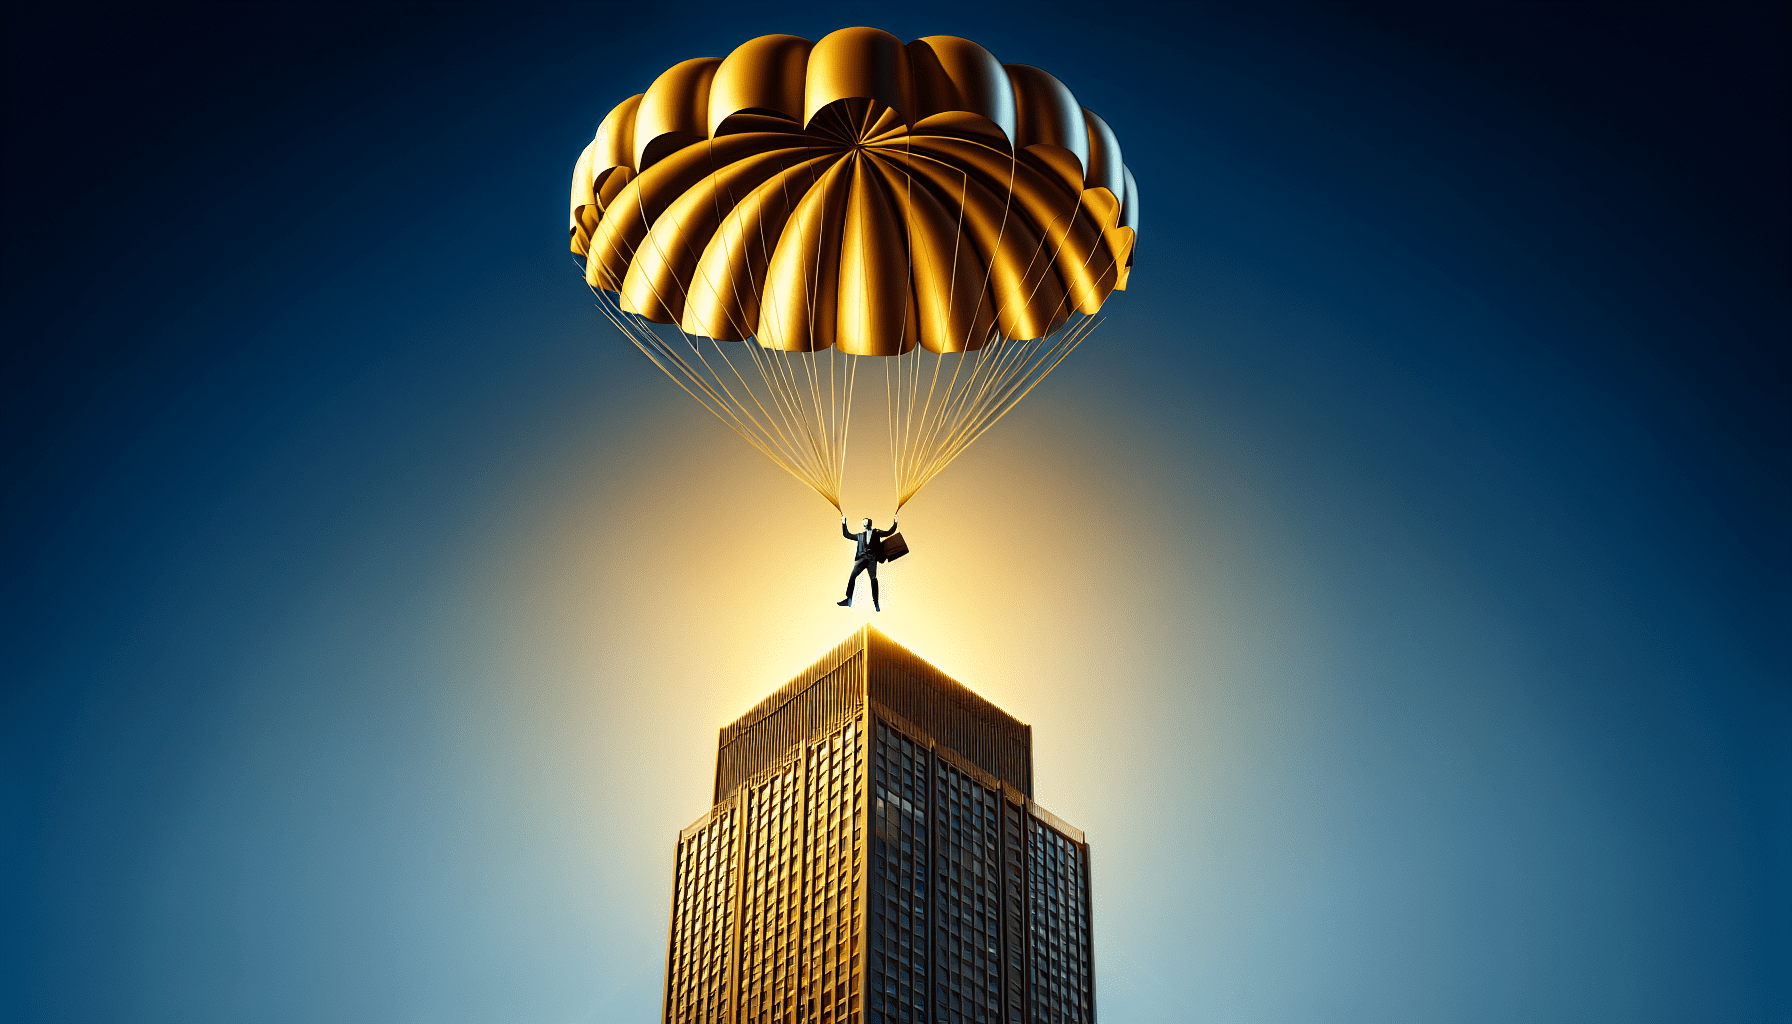 Illustration depicting the concept of golden parachutes